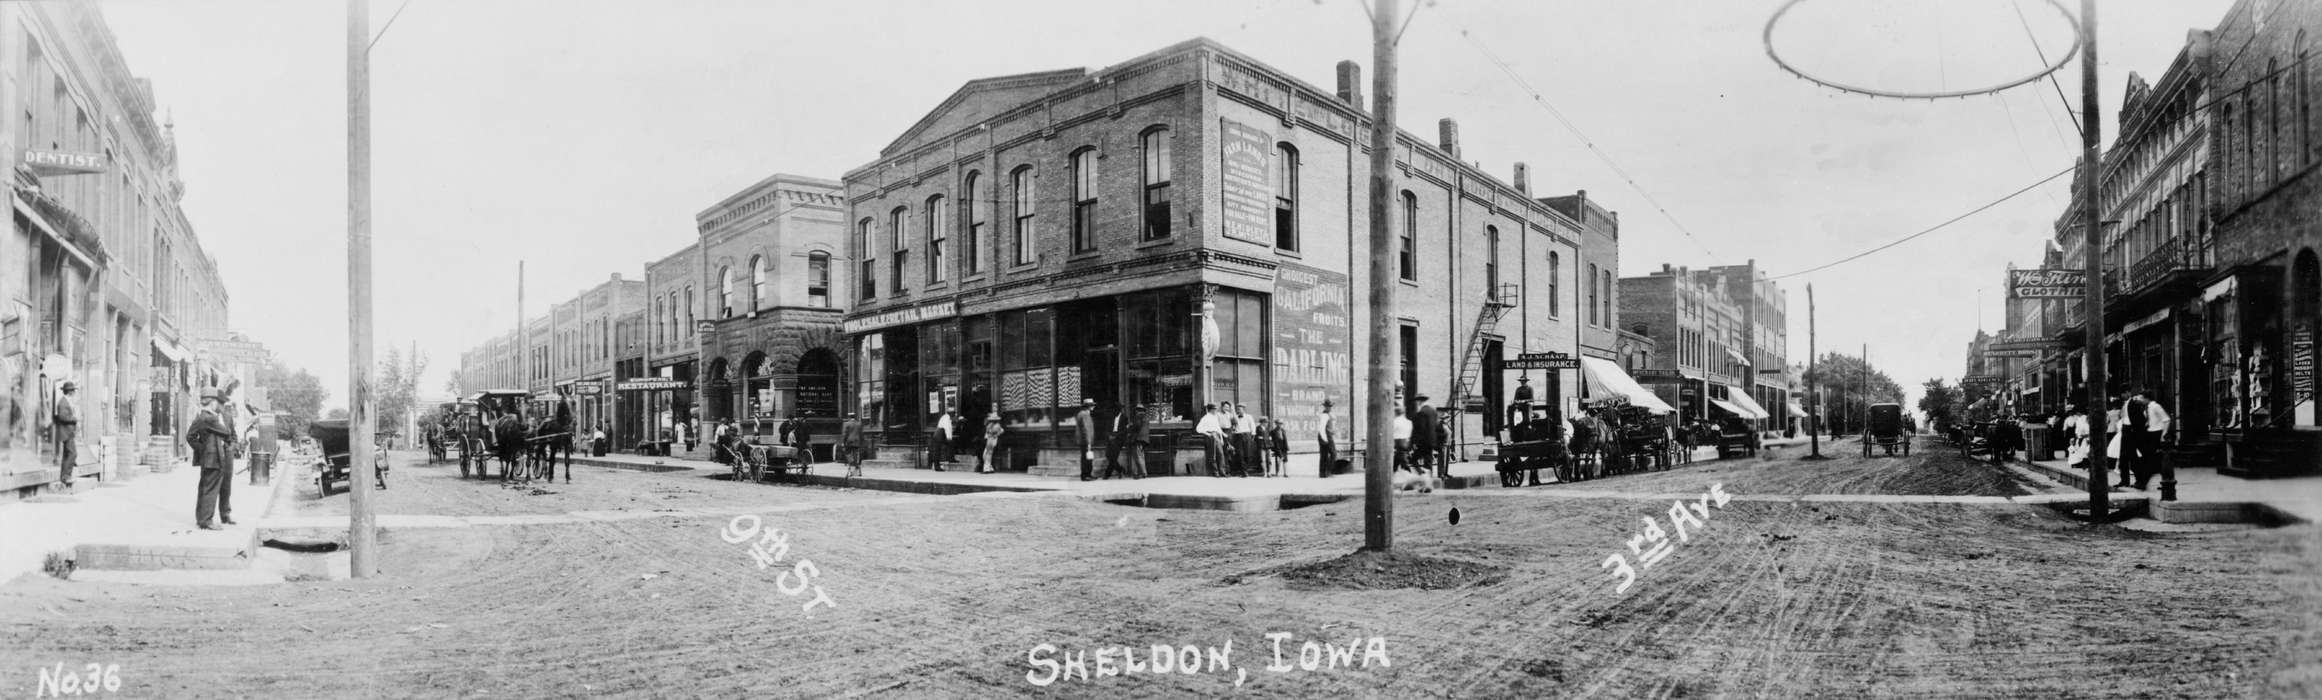 panoramic, Cities and Towns, Iowa History, brick building, mainstreet, Businesses and Factories, Leisure, Main Streets & Town Squares, history of Iowa, dirt street, storefront, Children, horse and buggy, Iowa, Library of Congress